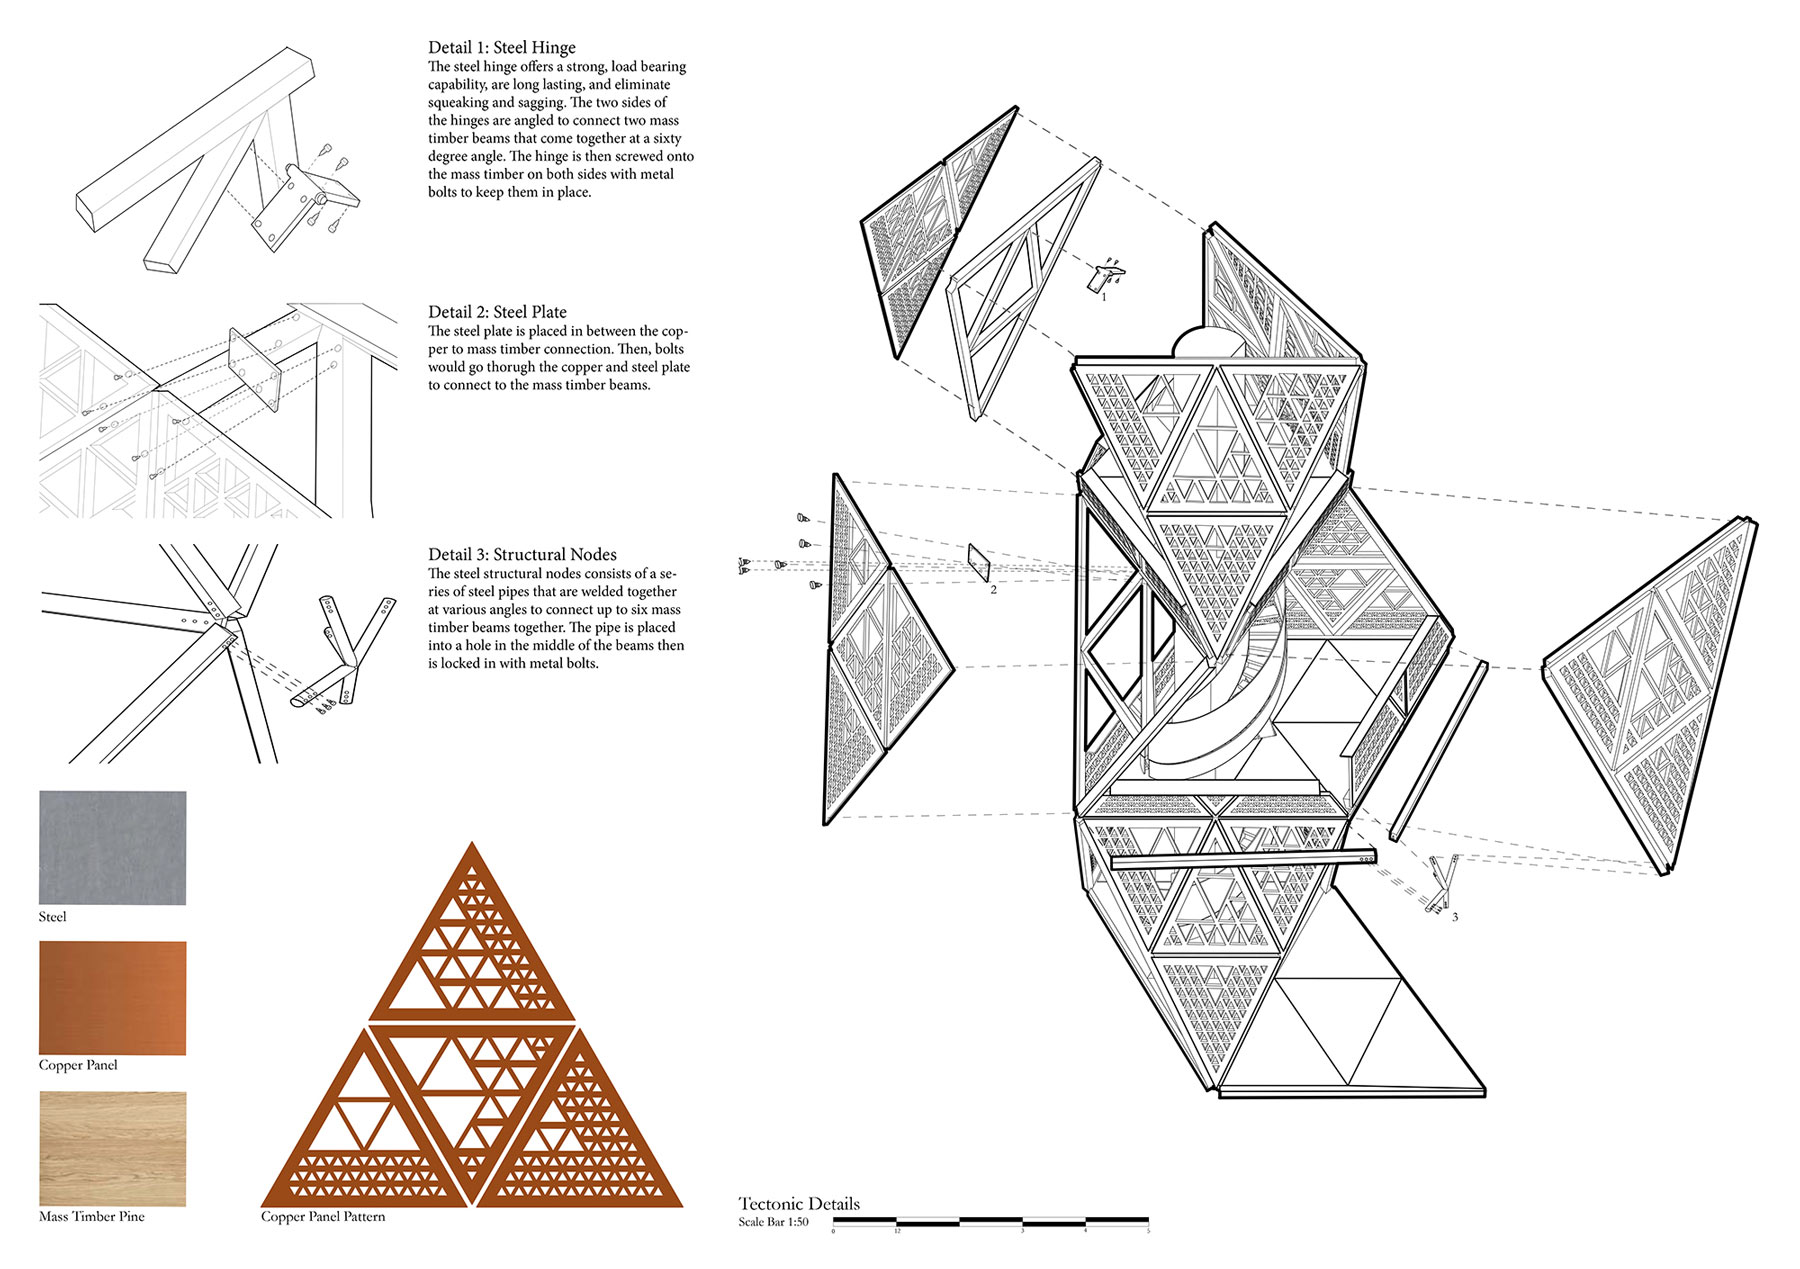 A blueprint of a triangular body of a building. There are descriptions for the connecting panels between these bodies, and there is a color pallet that consists of gray, orange, and light tan material.